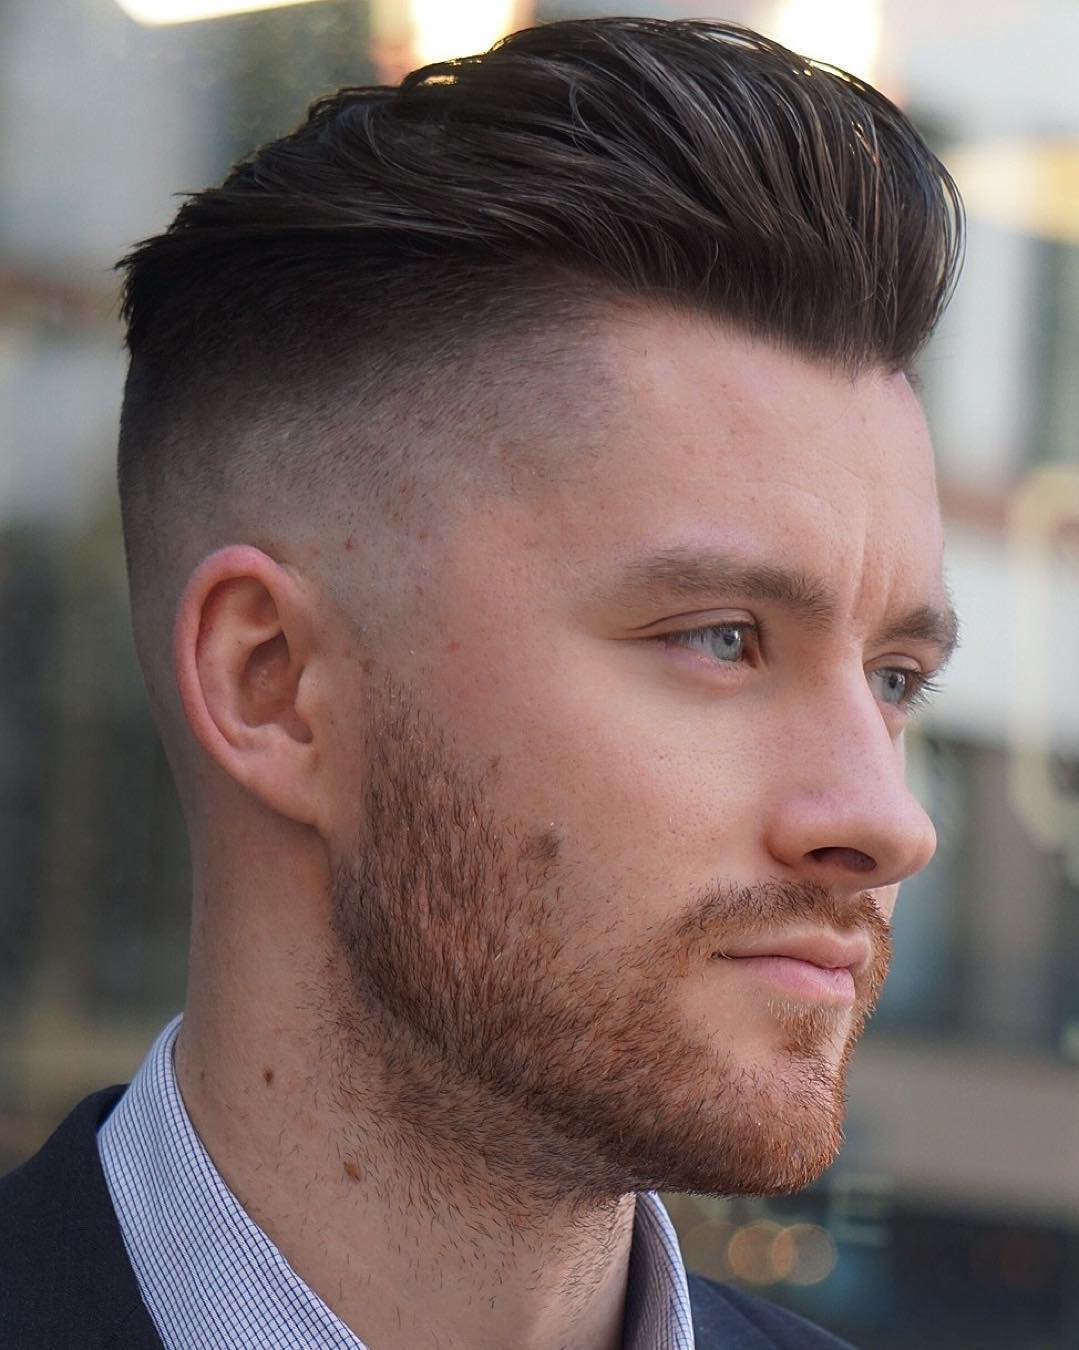 Tousled undercut mexican men hairstyles